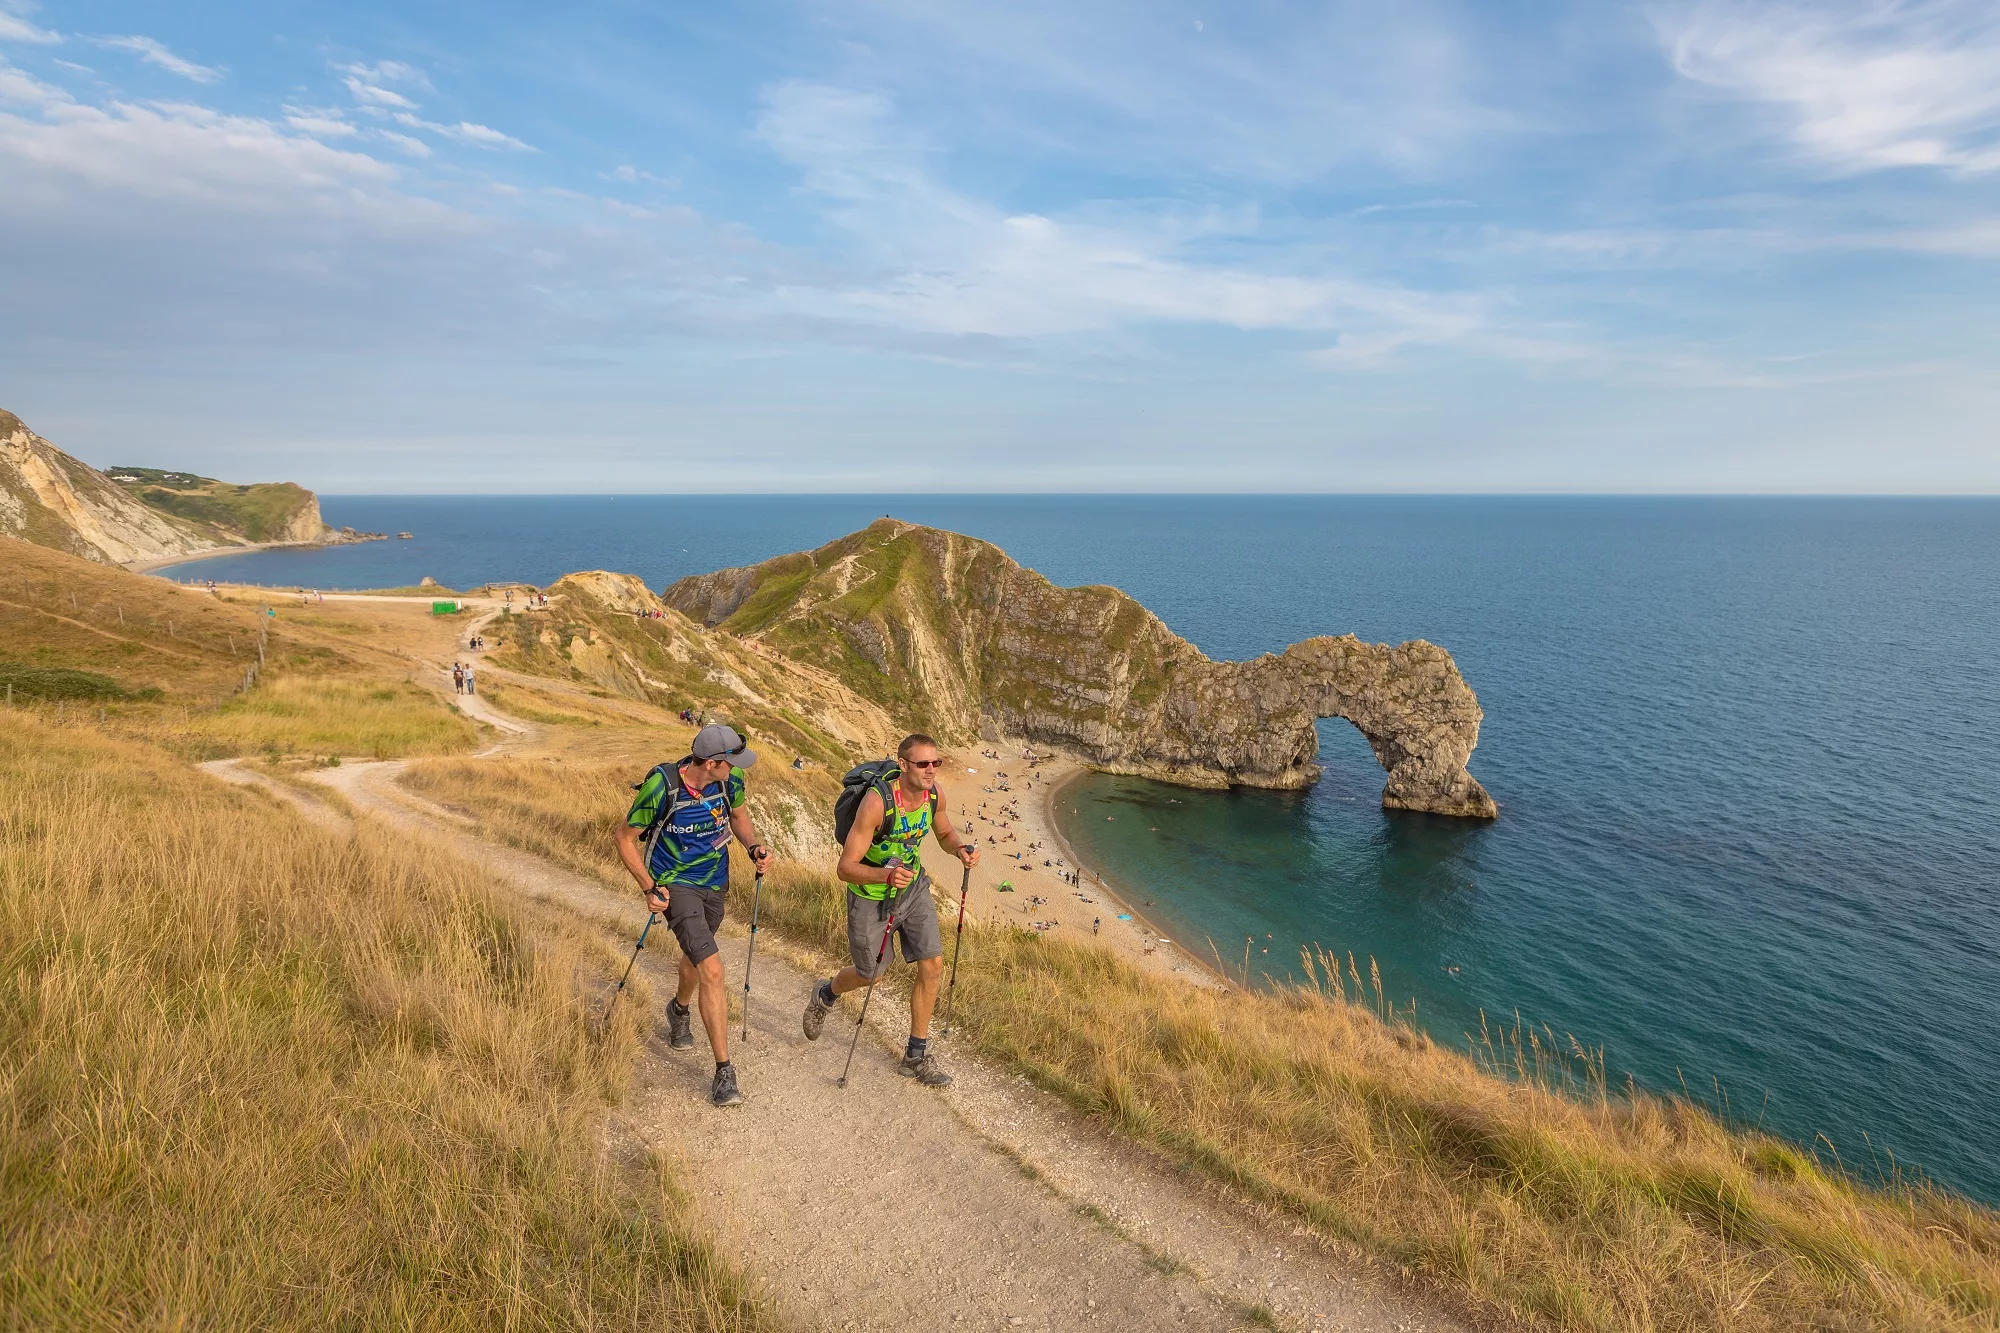 Two walkers with poles on the Jurassic coast path with the sea in the background.